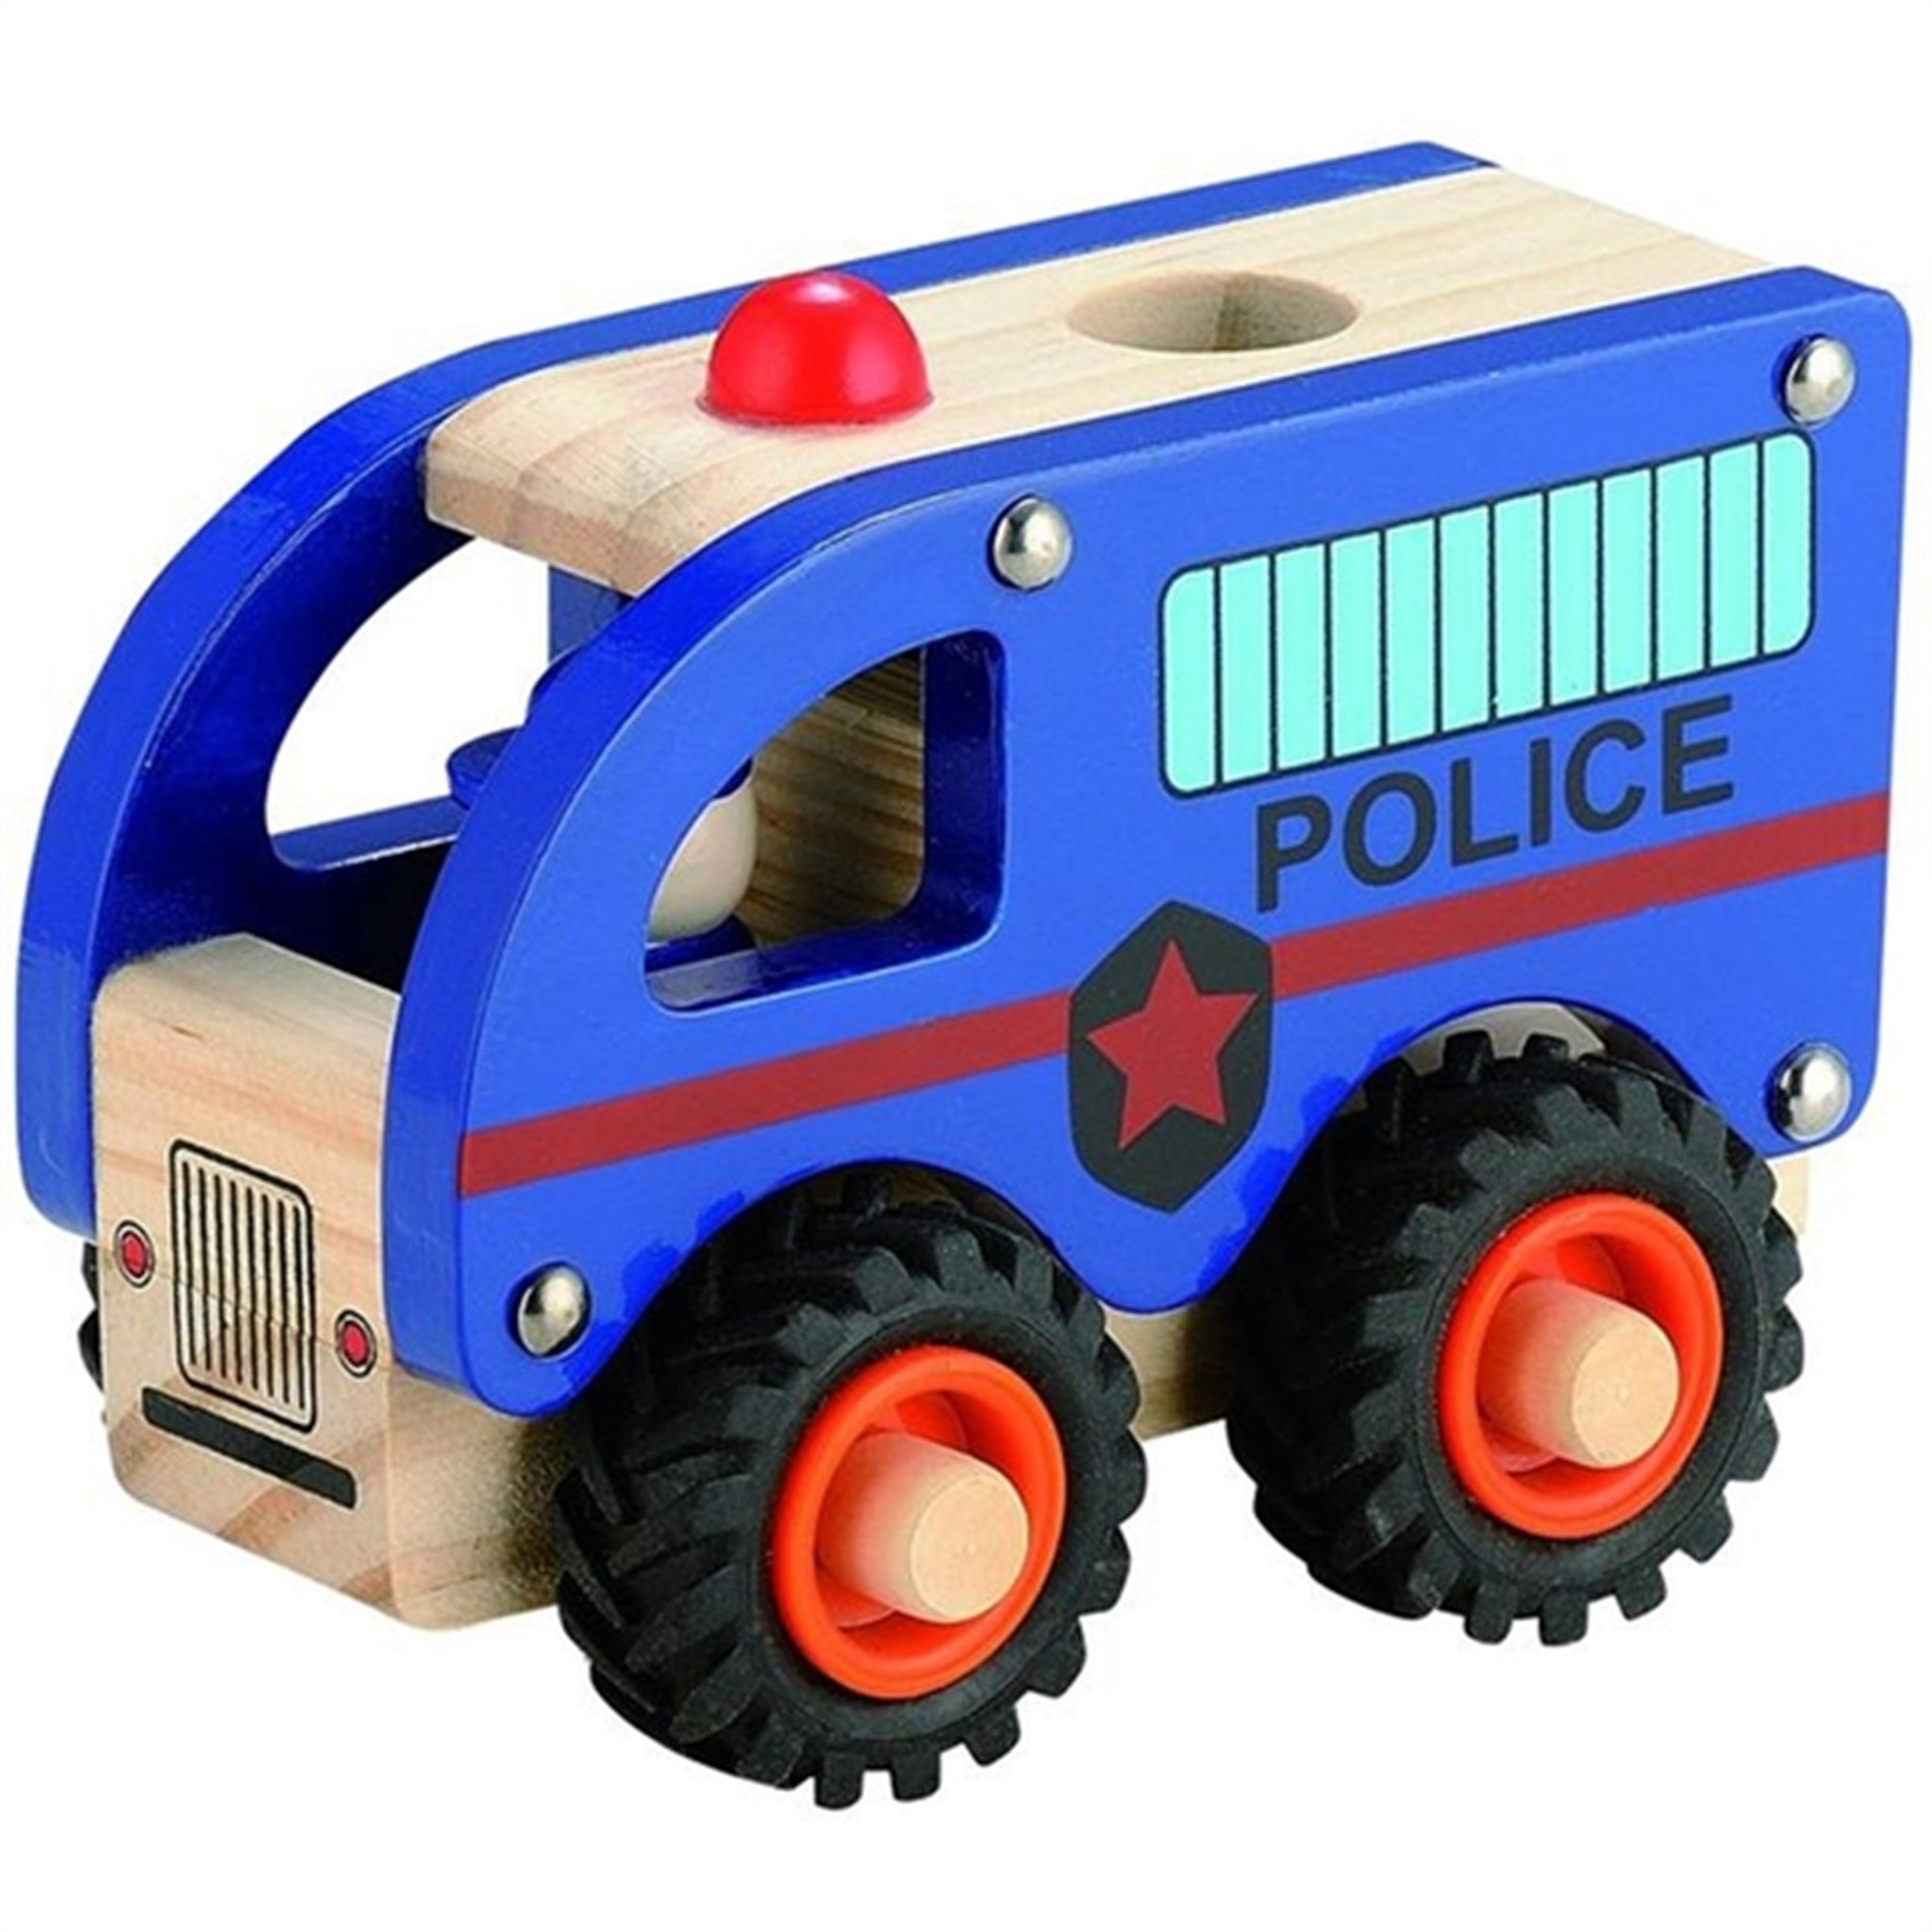 Magni Wooden Police Car With Rubber Wheels Blue